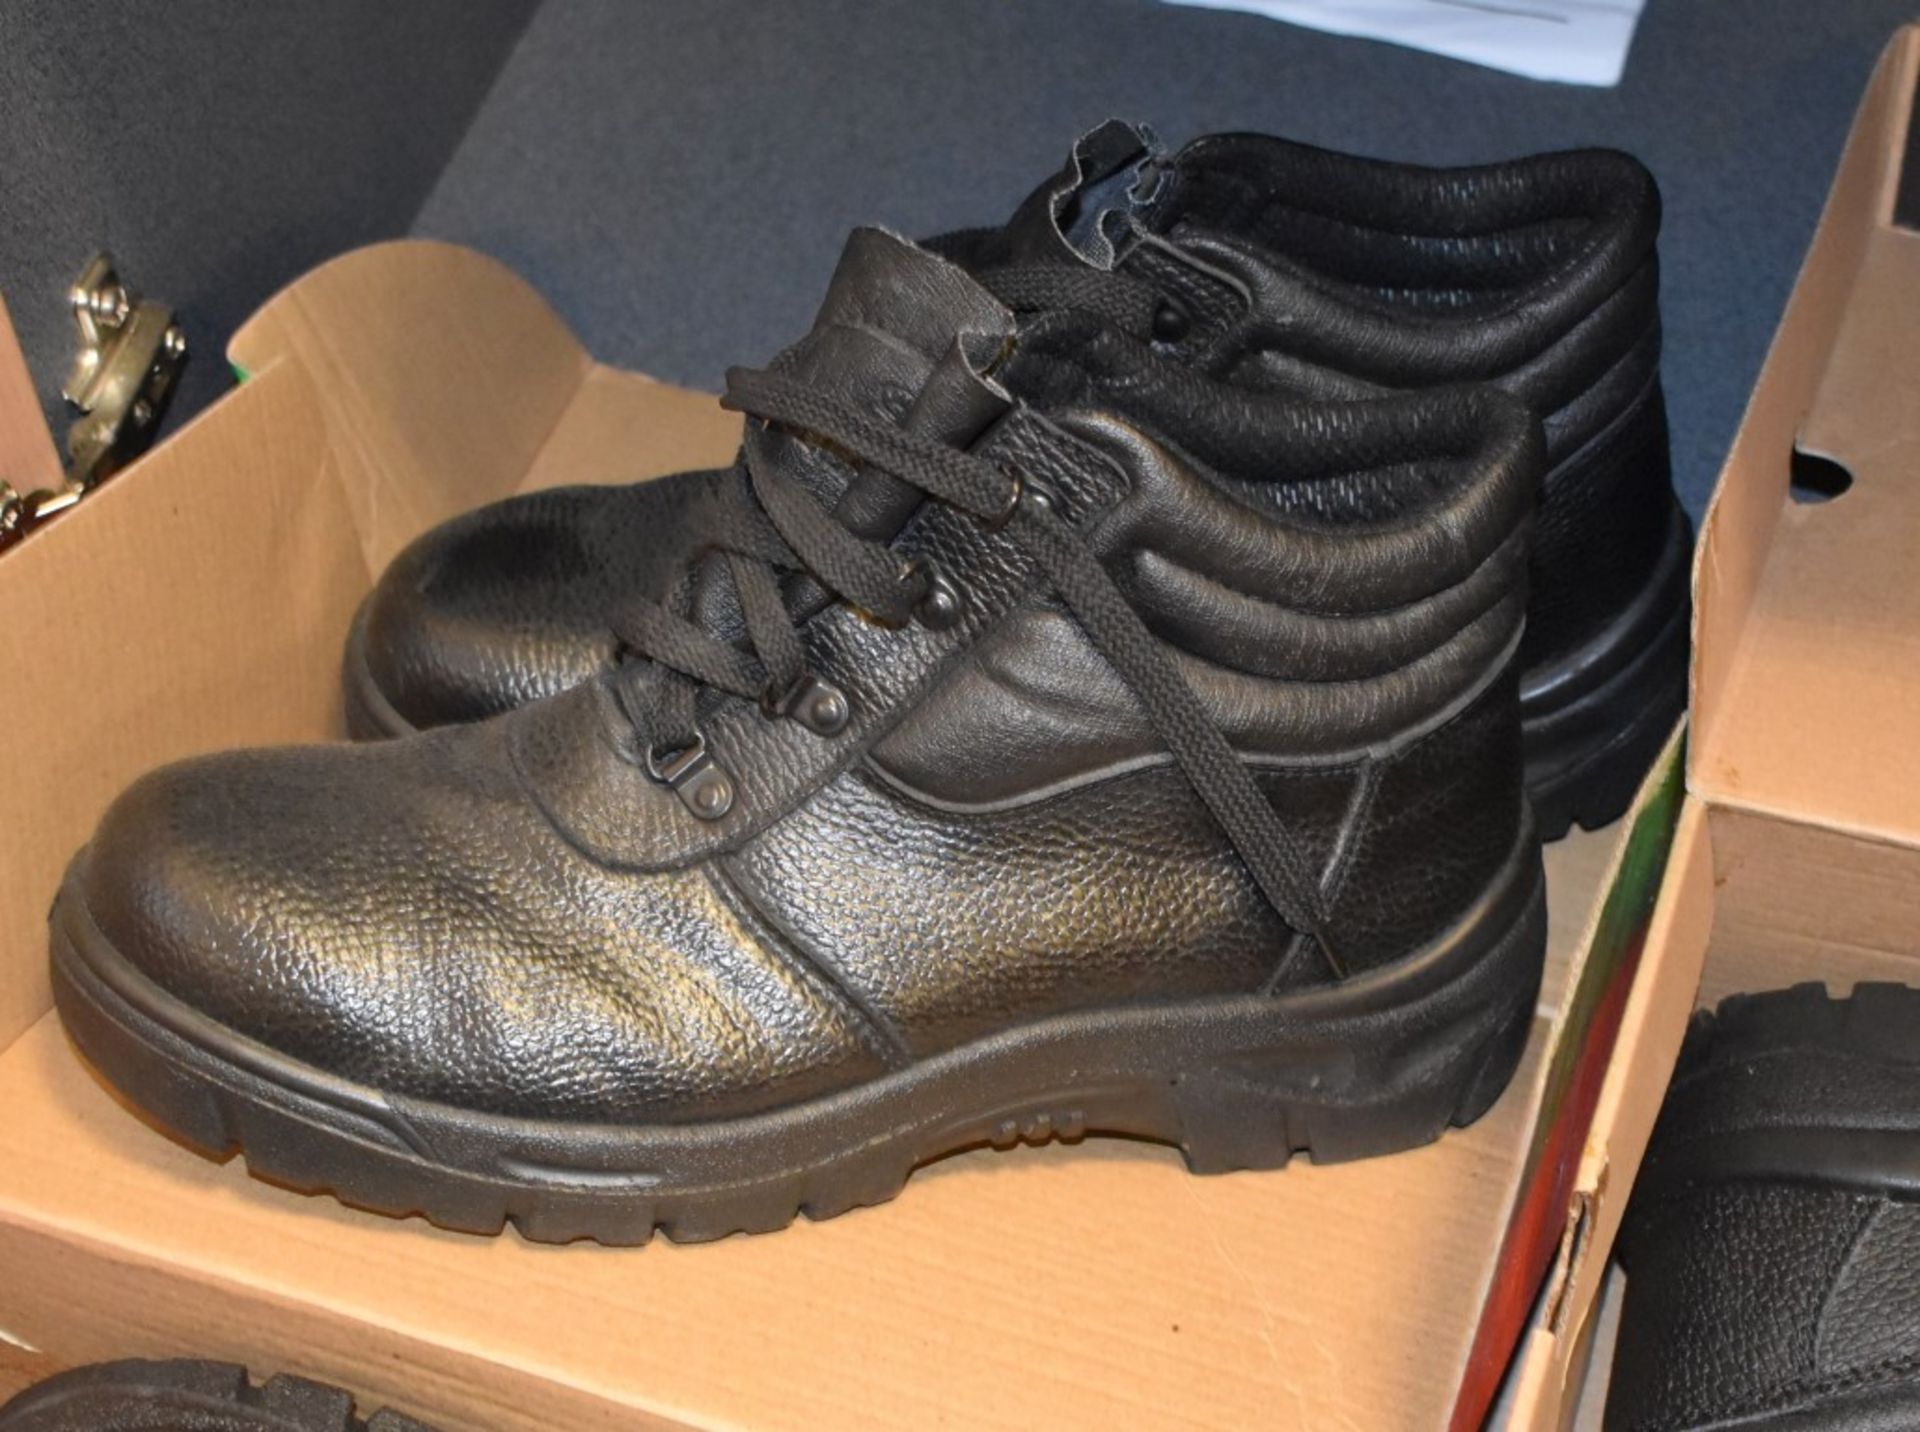 5 x Pairs of Safety Work Boots With Boxes - Various Styles and Sizes Included - Image 2 of 7